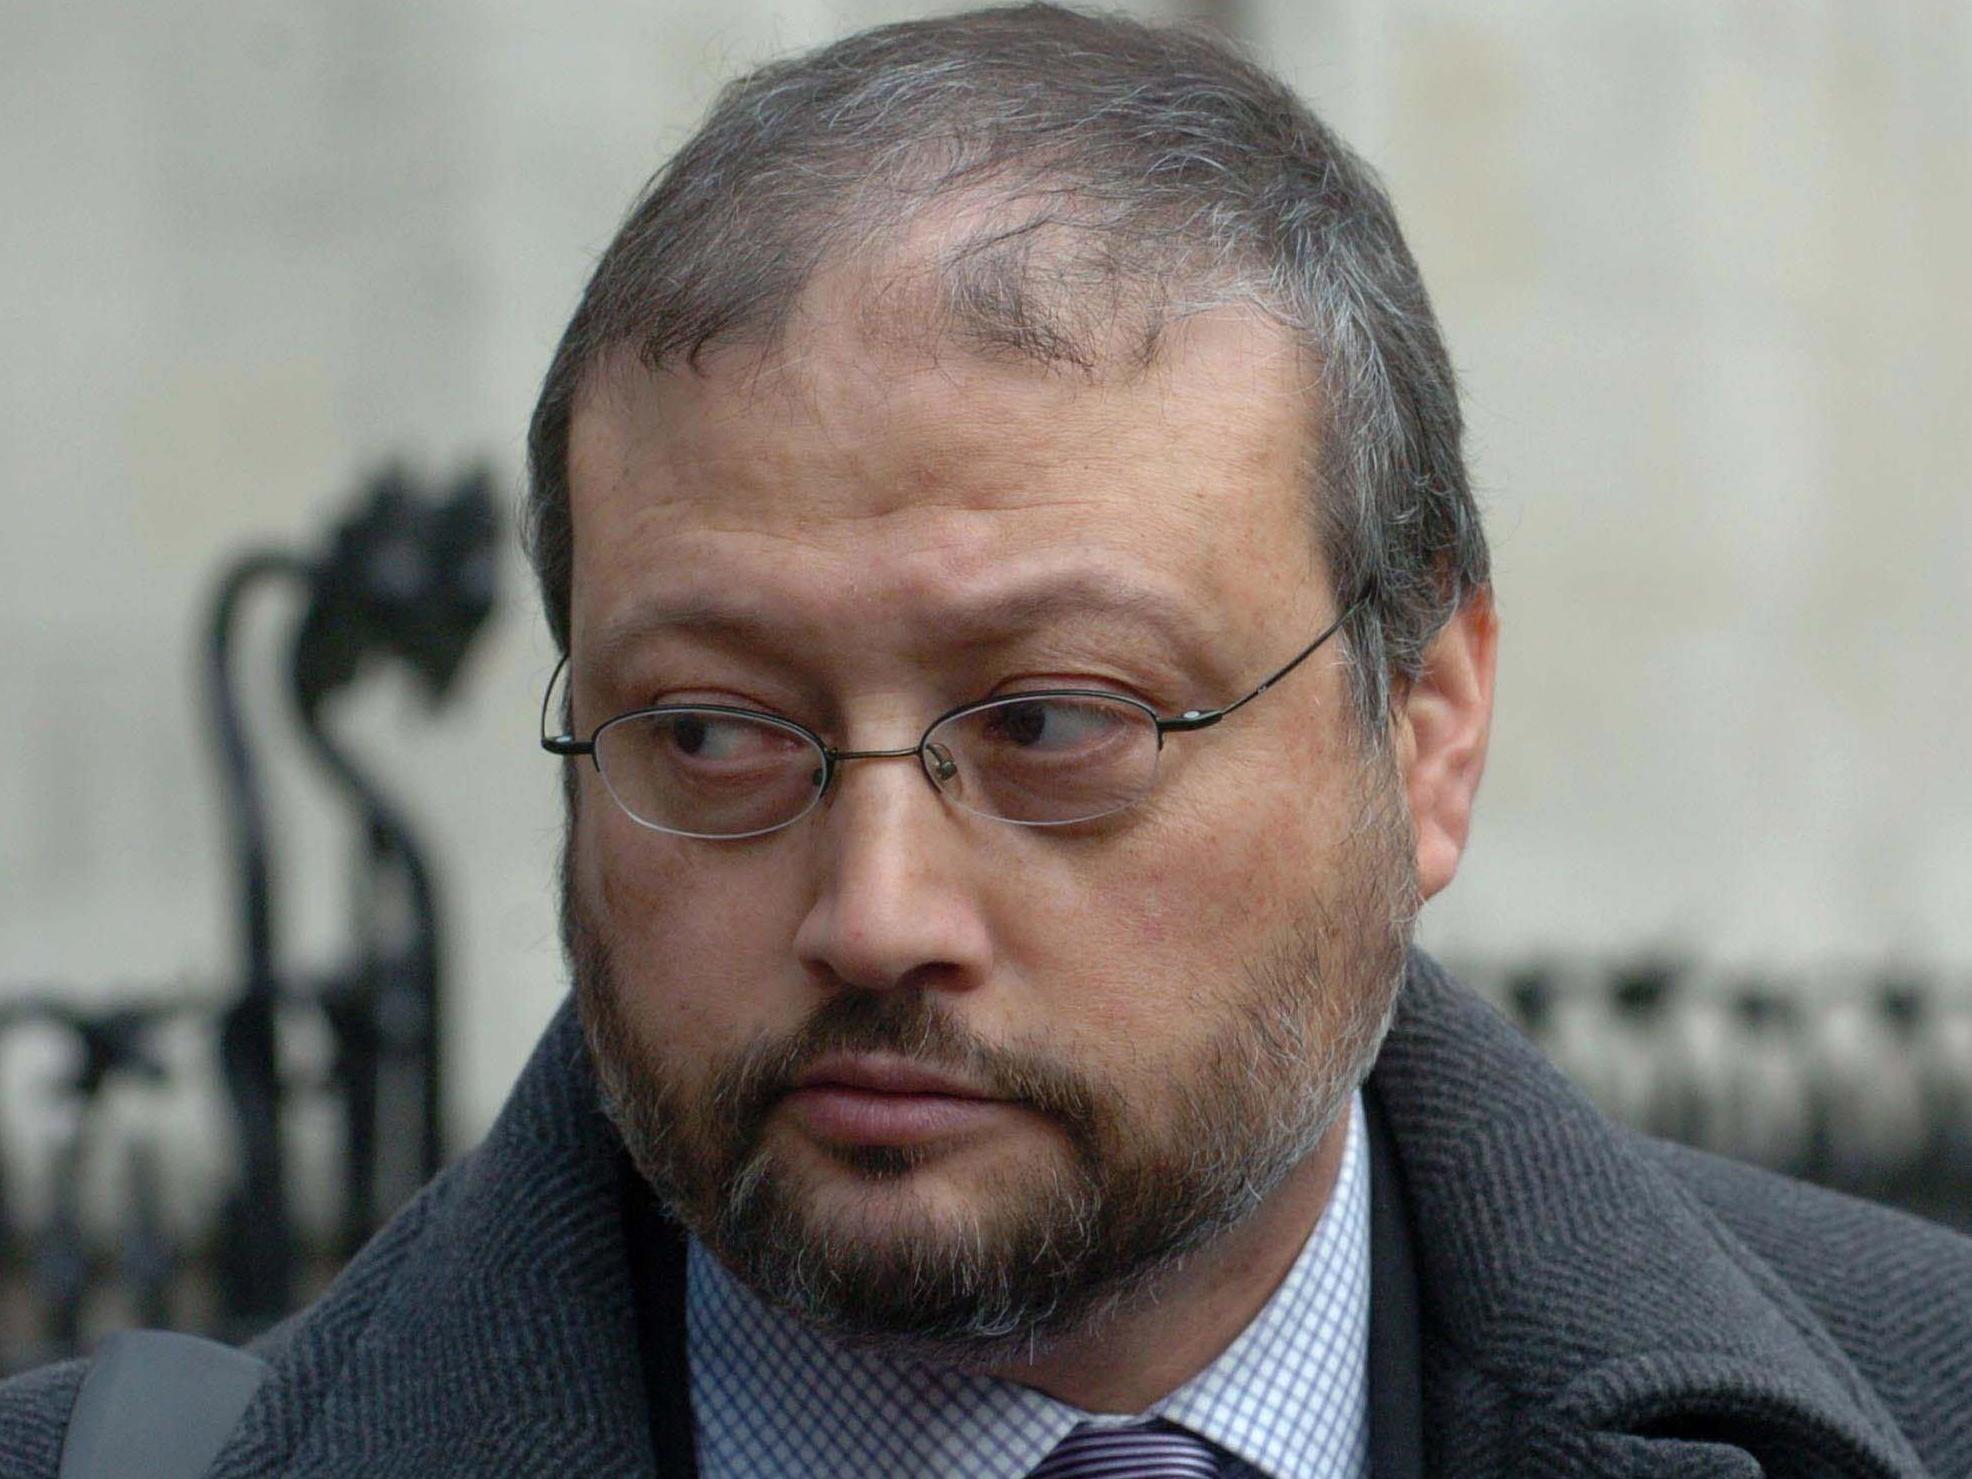 Leaked intelligence reports suggest the US-based journalist was tortured before he was killed